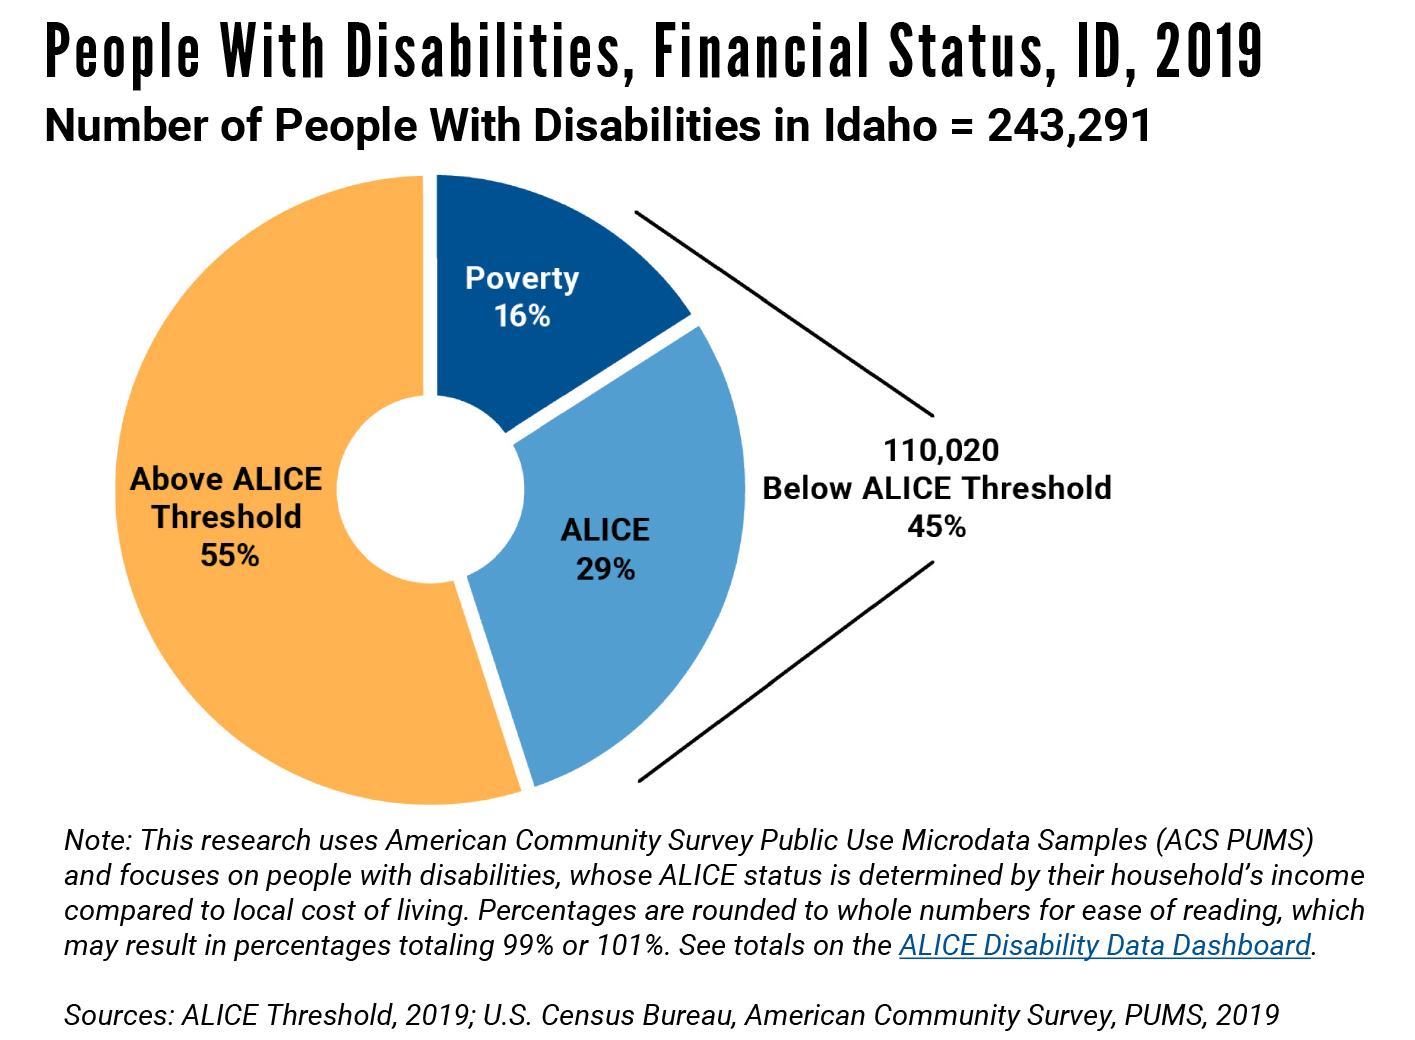 People with disabilities: financial status 2019